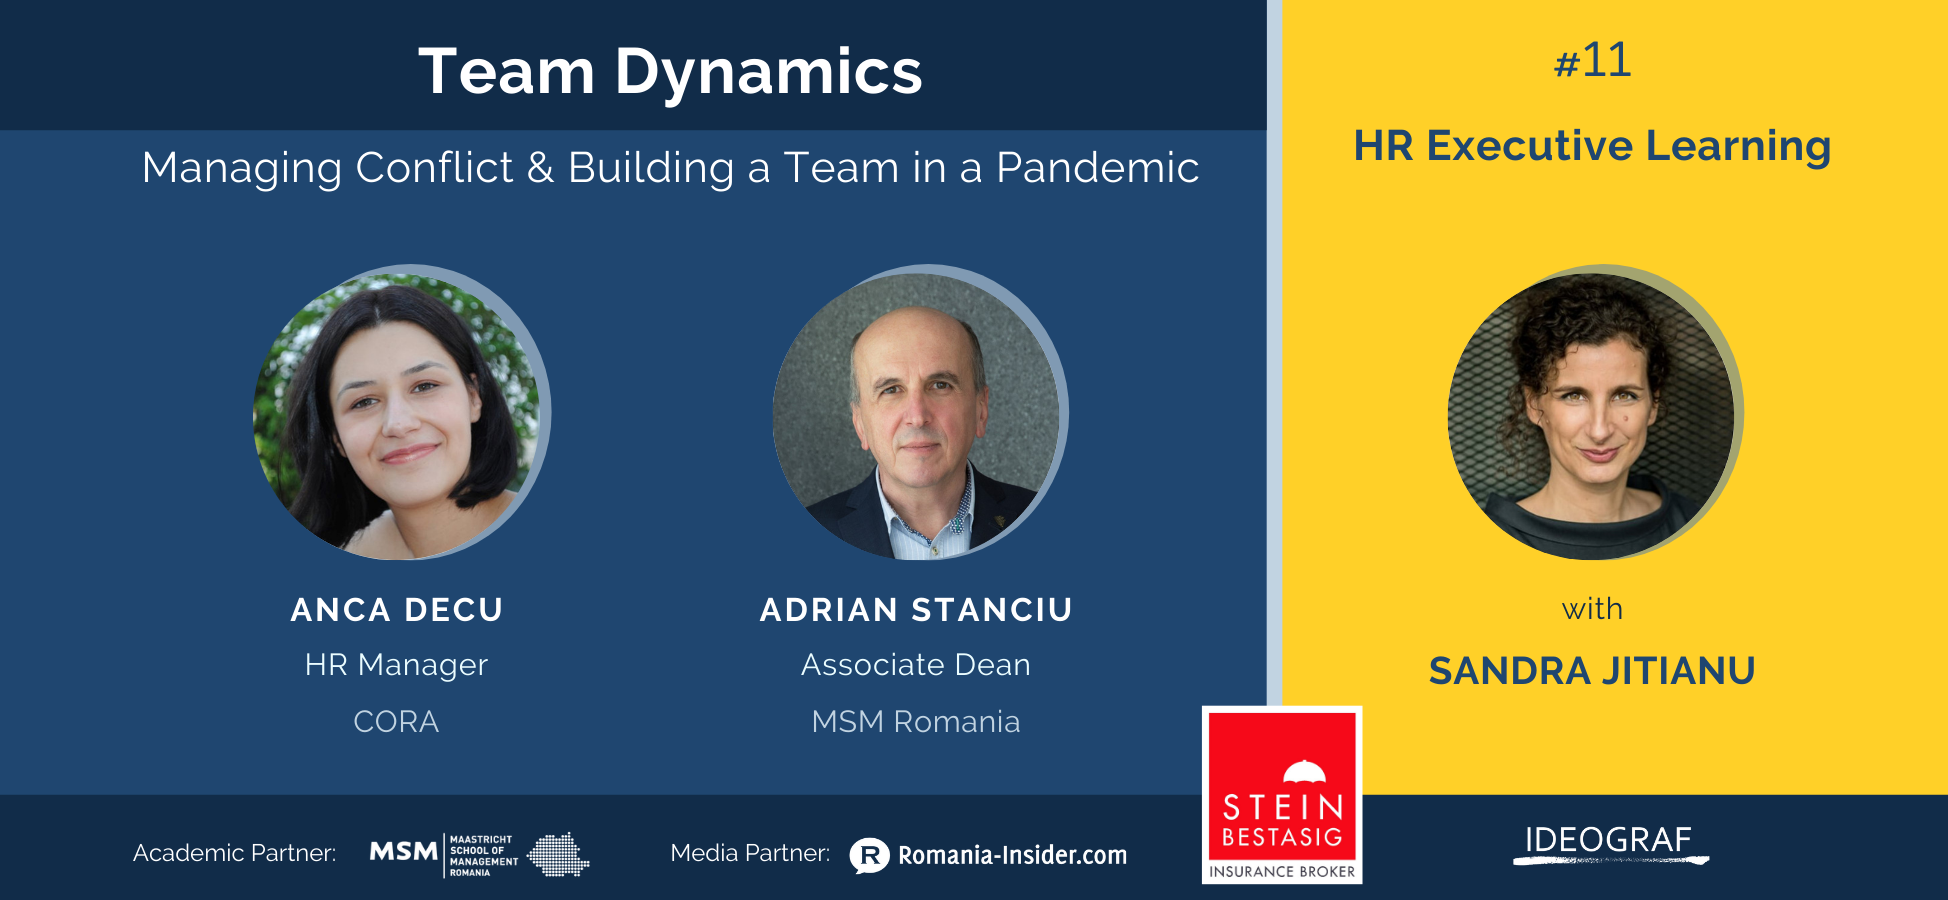 Ideograf is hosting the 11th edition of HR Executive Learning event series on the topic of “Team Dynamics”, with two top business leaders